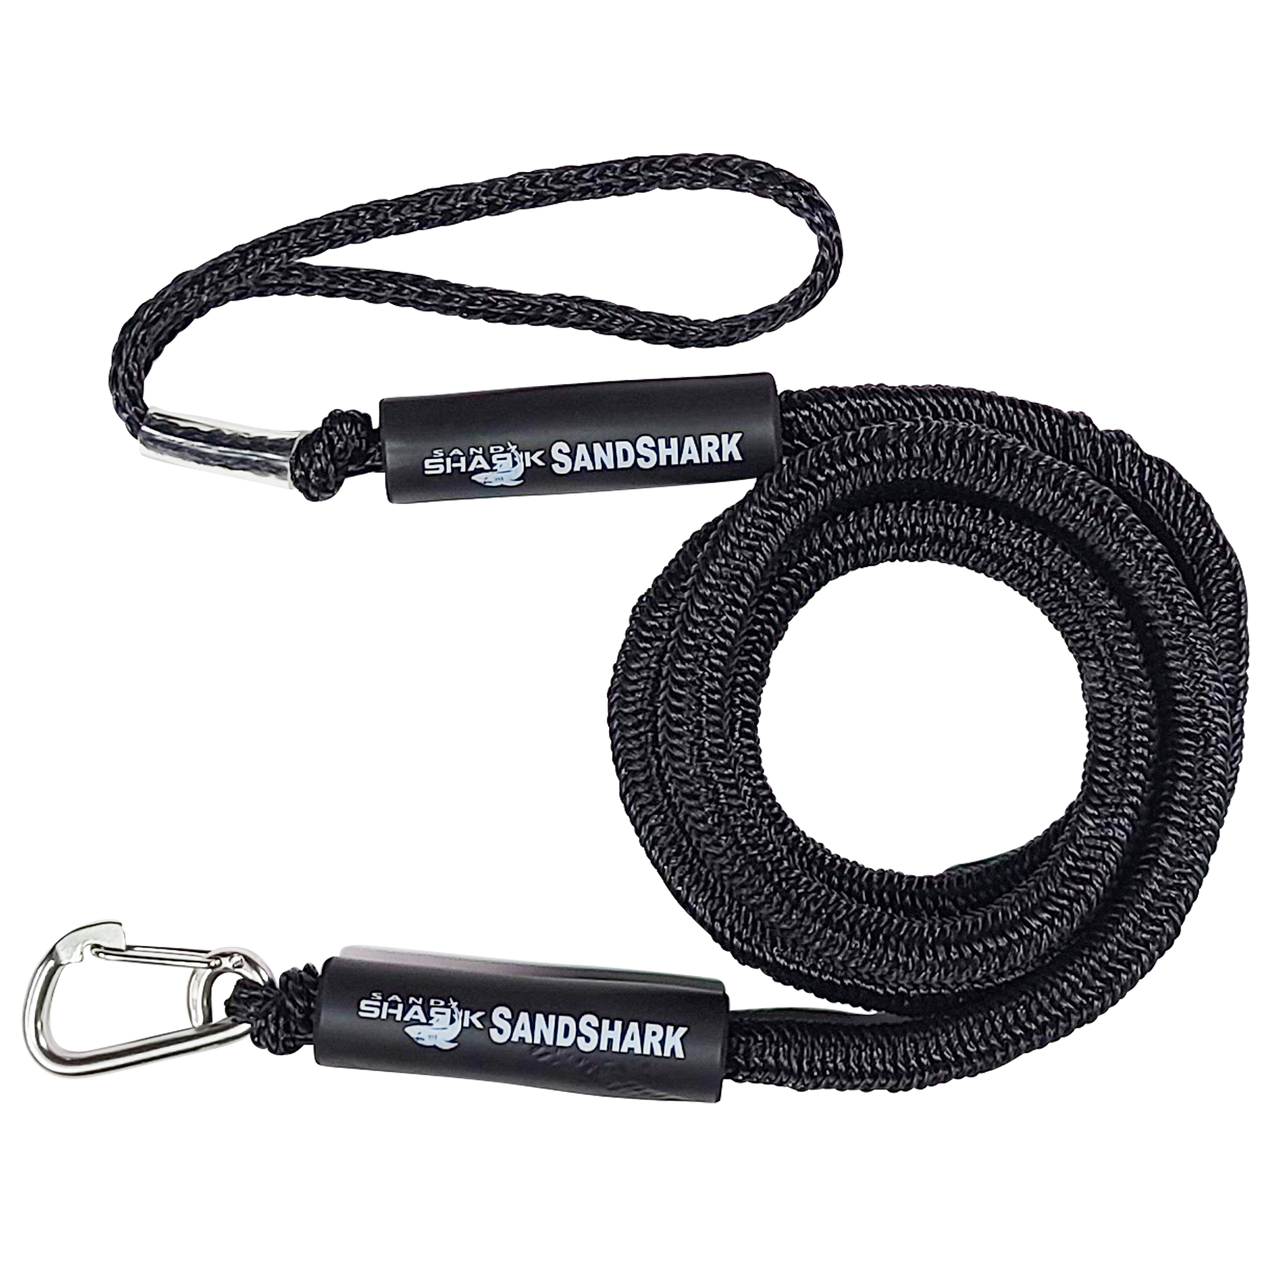 Most Effective Anchoring Line for your Boat, Pontoon, PWC, or Jet Ski!